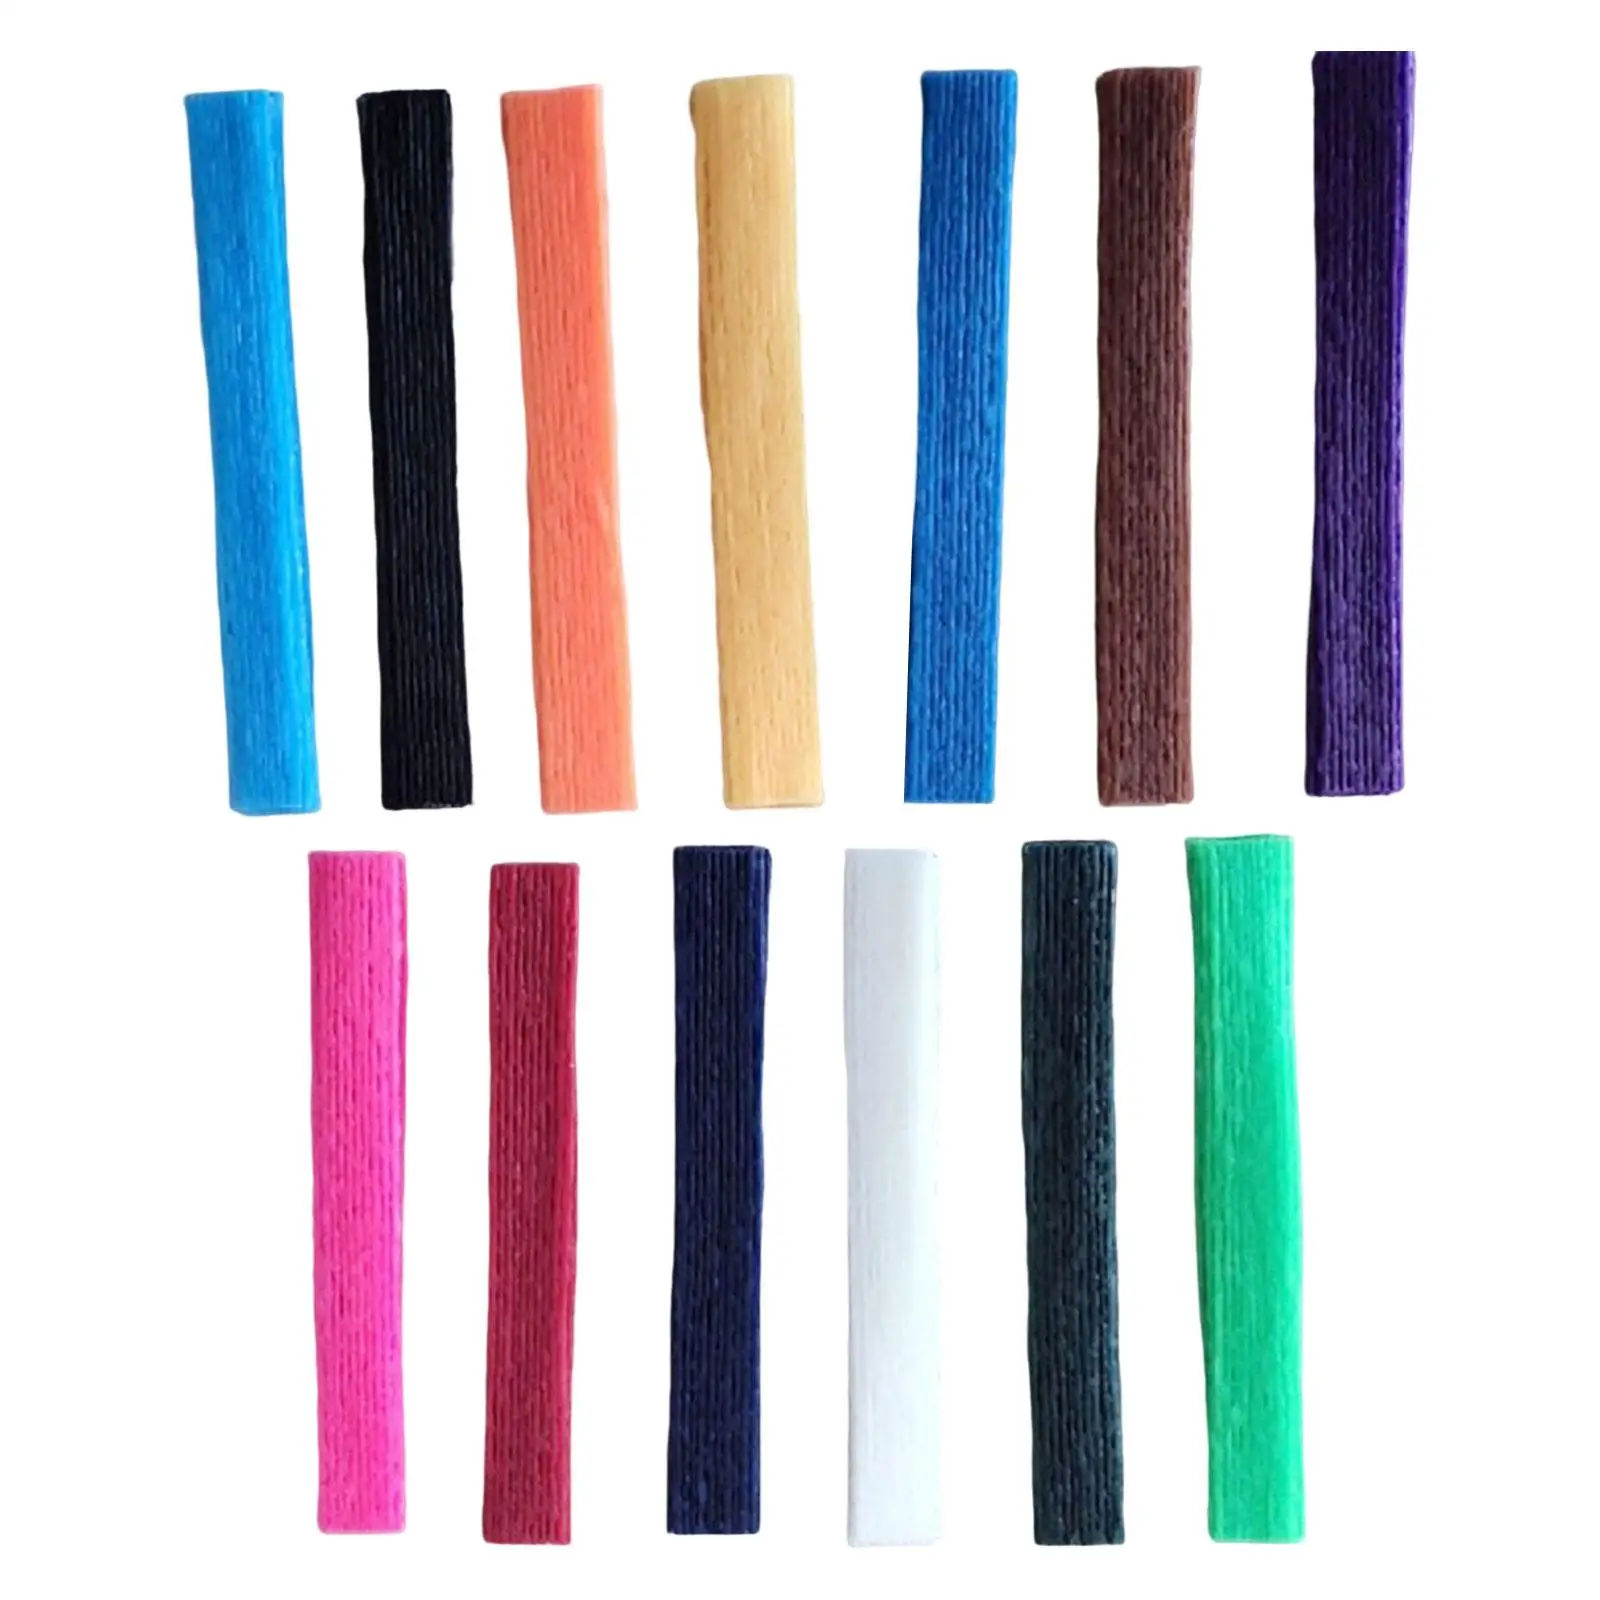 

520 Pieces Wax Craft Sticks for Kids Bendable Sticky Yarn Wax Sticks for Children DIY Arts and Crafts 13 Colors Handicraft Home